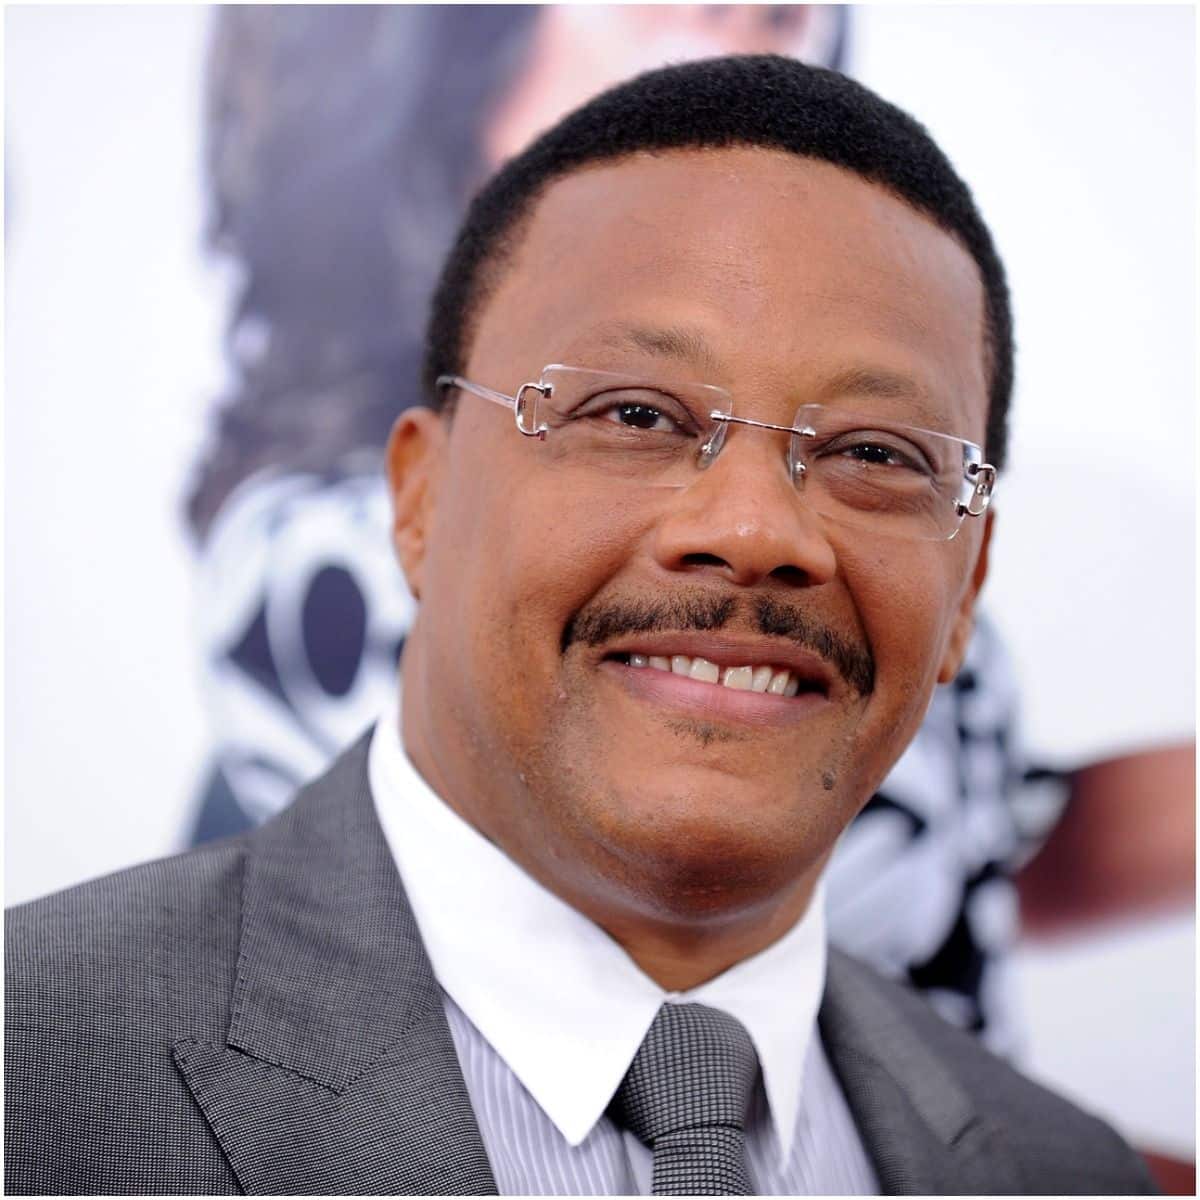 what is the net worth of Judge Greg Mathis